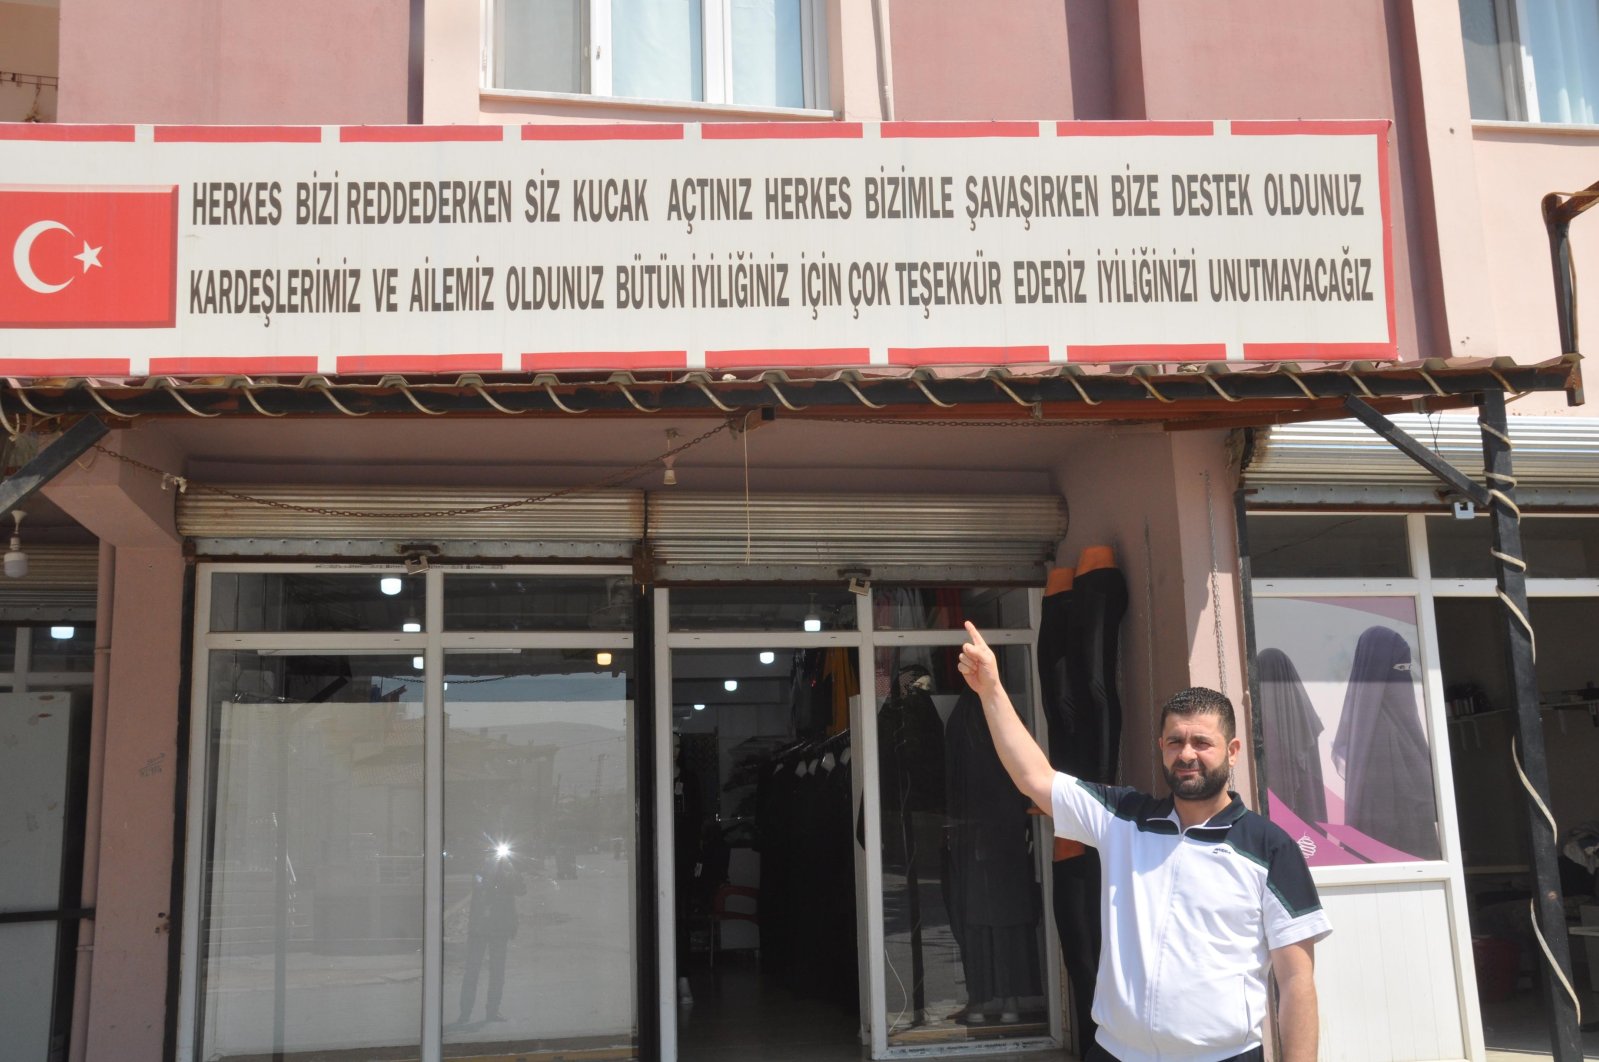 A refugee who settled in Turkey after fleeing the Syrian civil war hung a signboard of appreciation for the country embracing Syrians after the world turned their back on them, Hatay province, Turkey, Aug. 22, 2020 (DHA Photo)